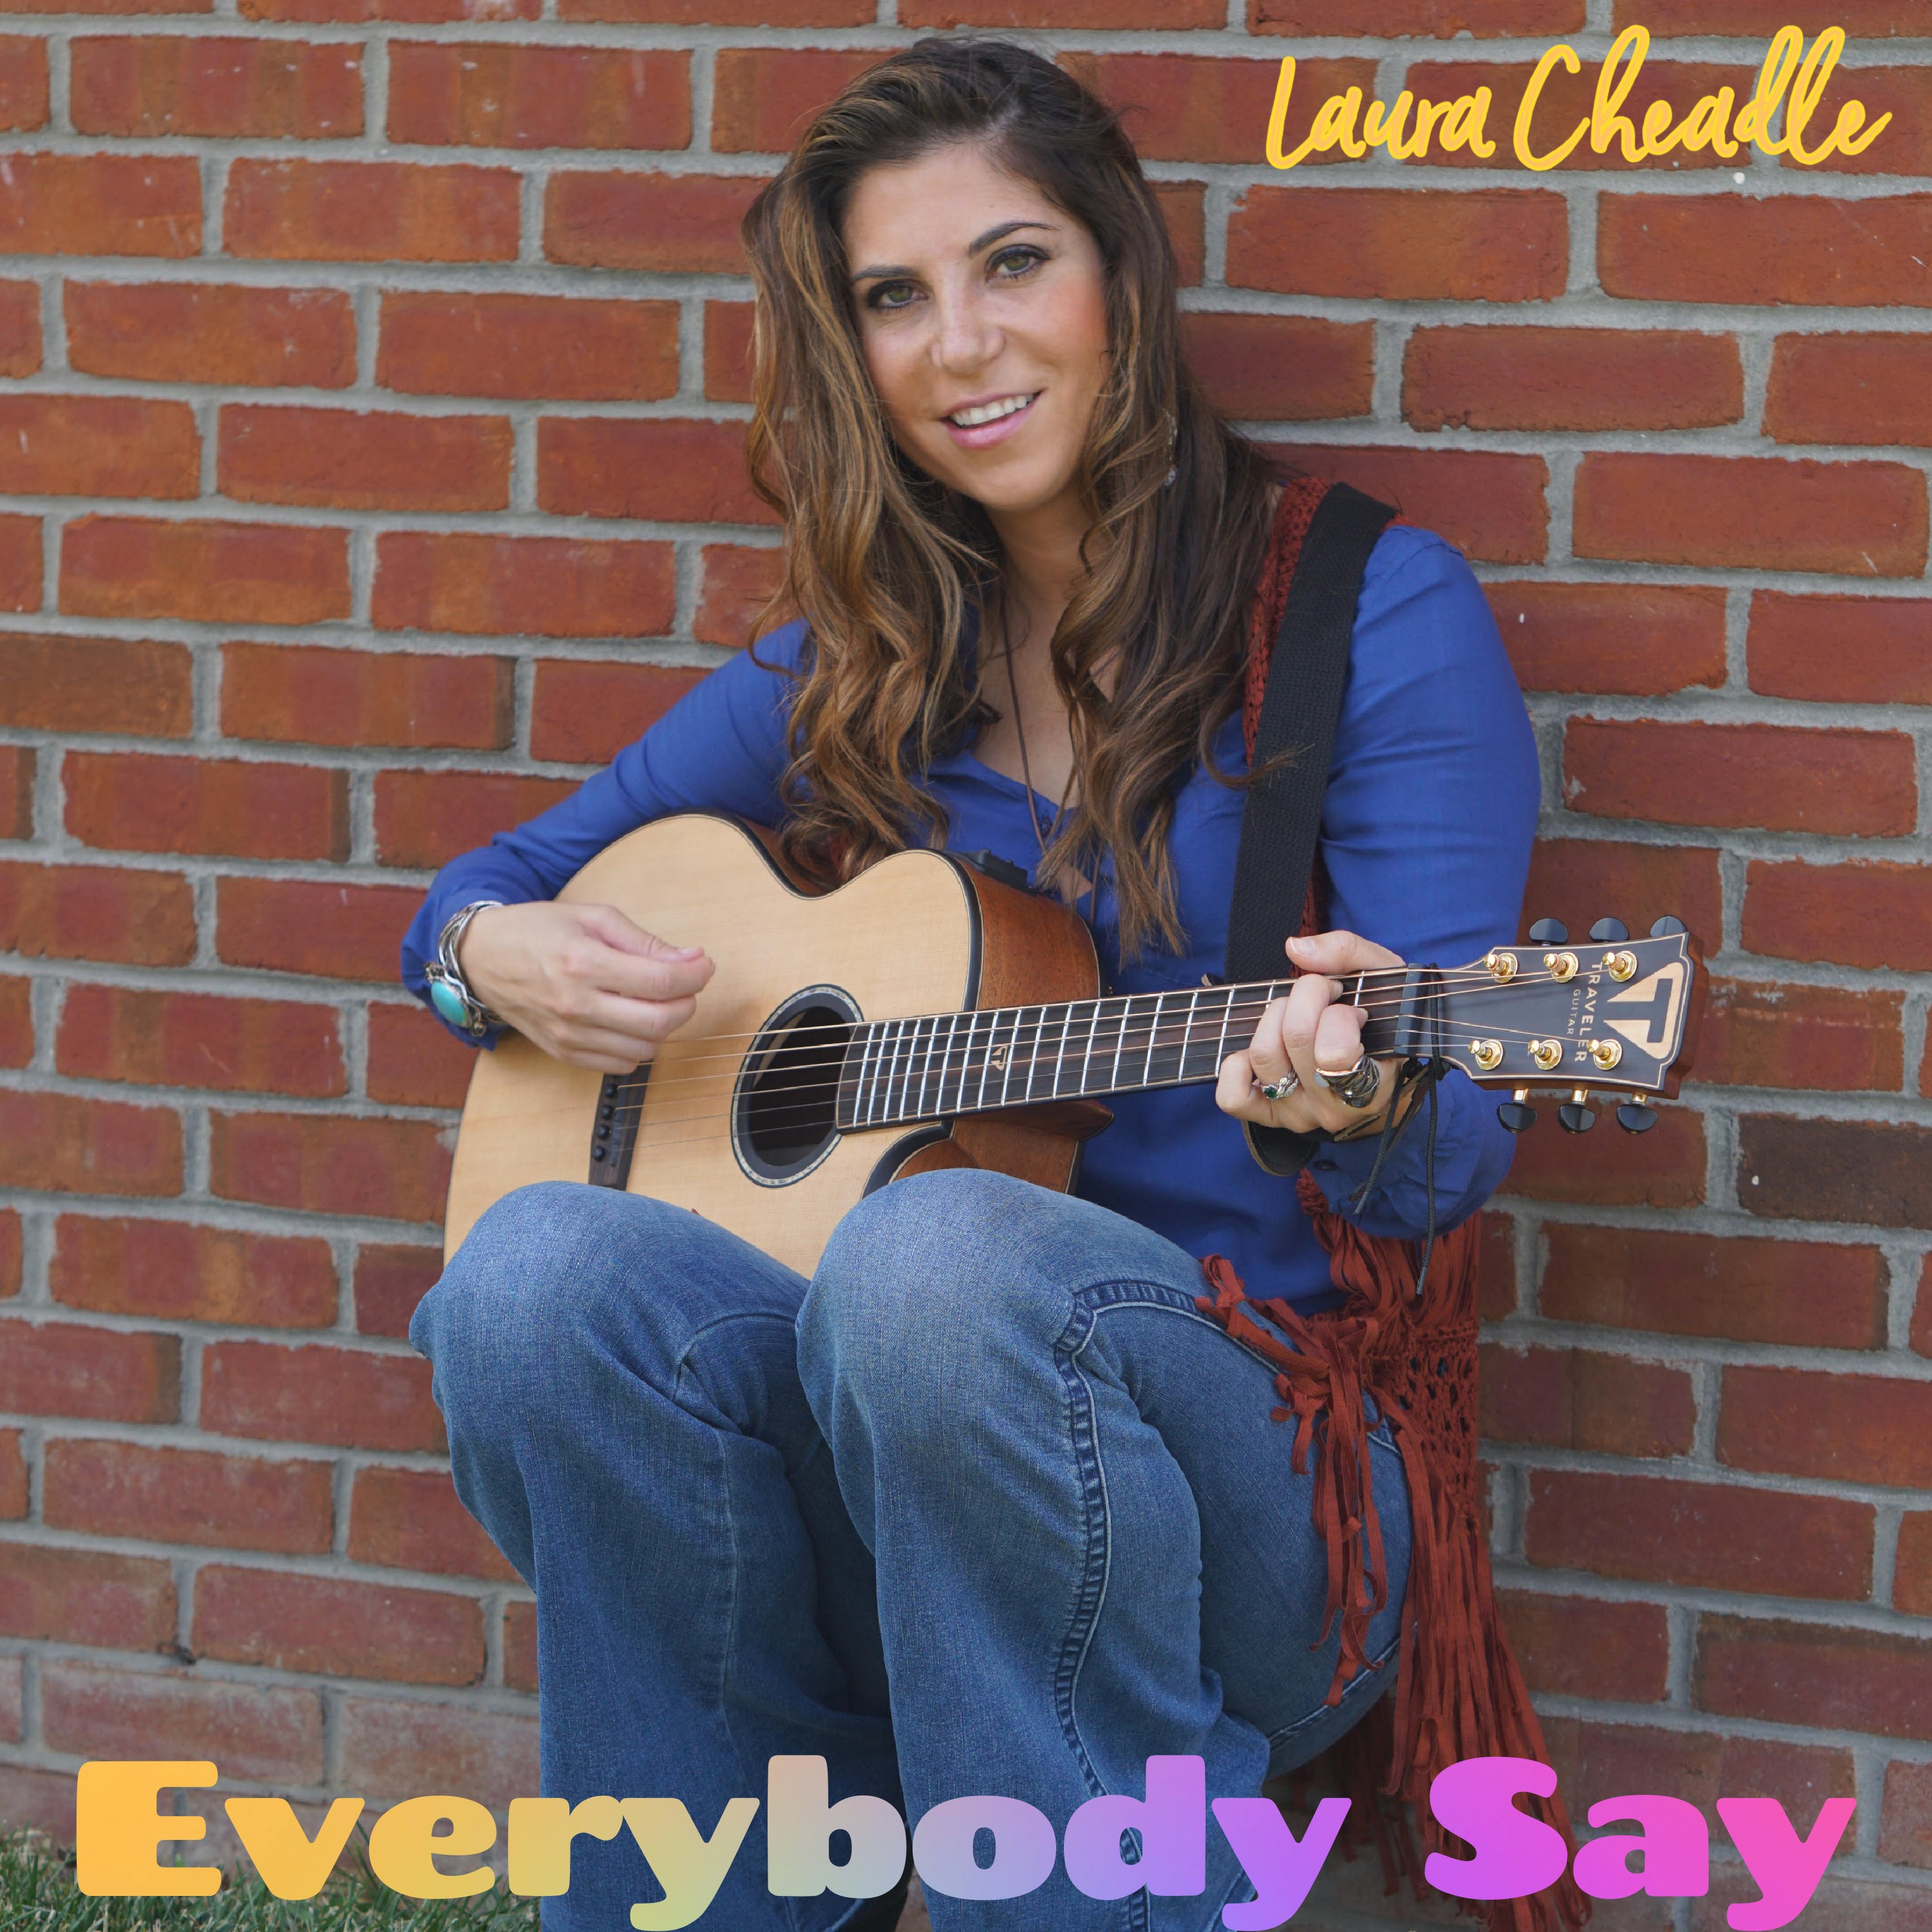 Laura Cheadle Releases New Music Video for Her Single, "Everybody Say"